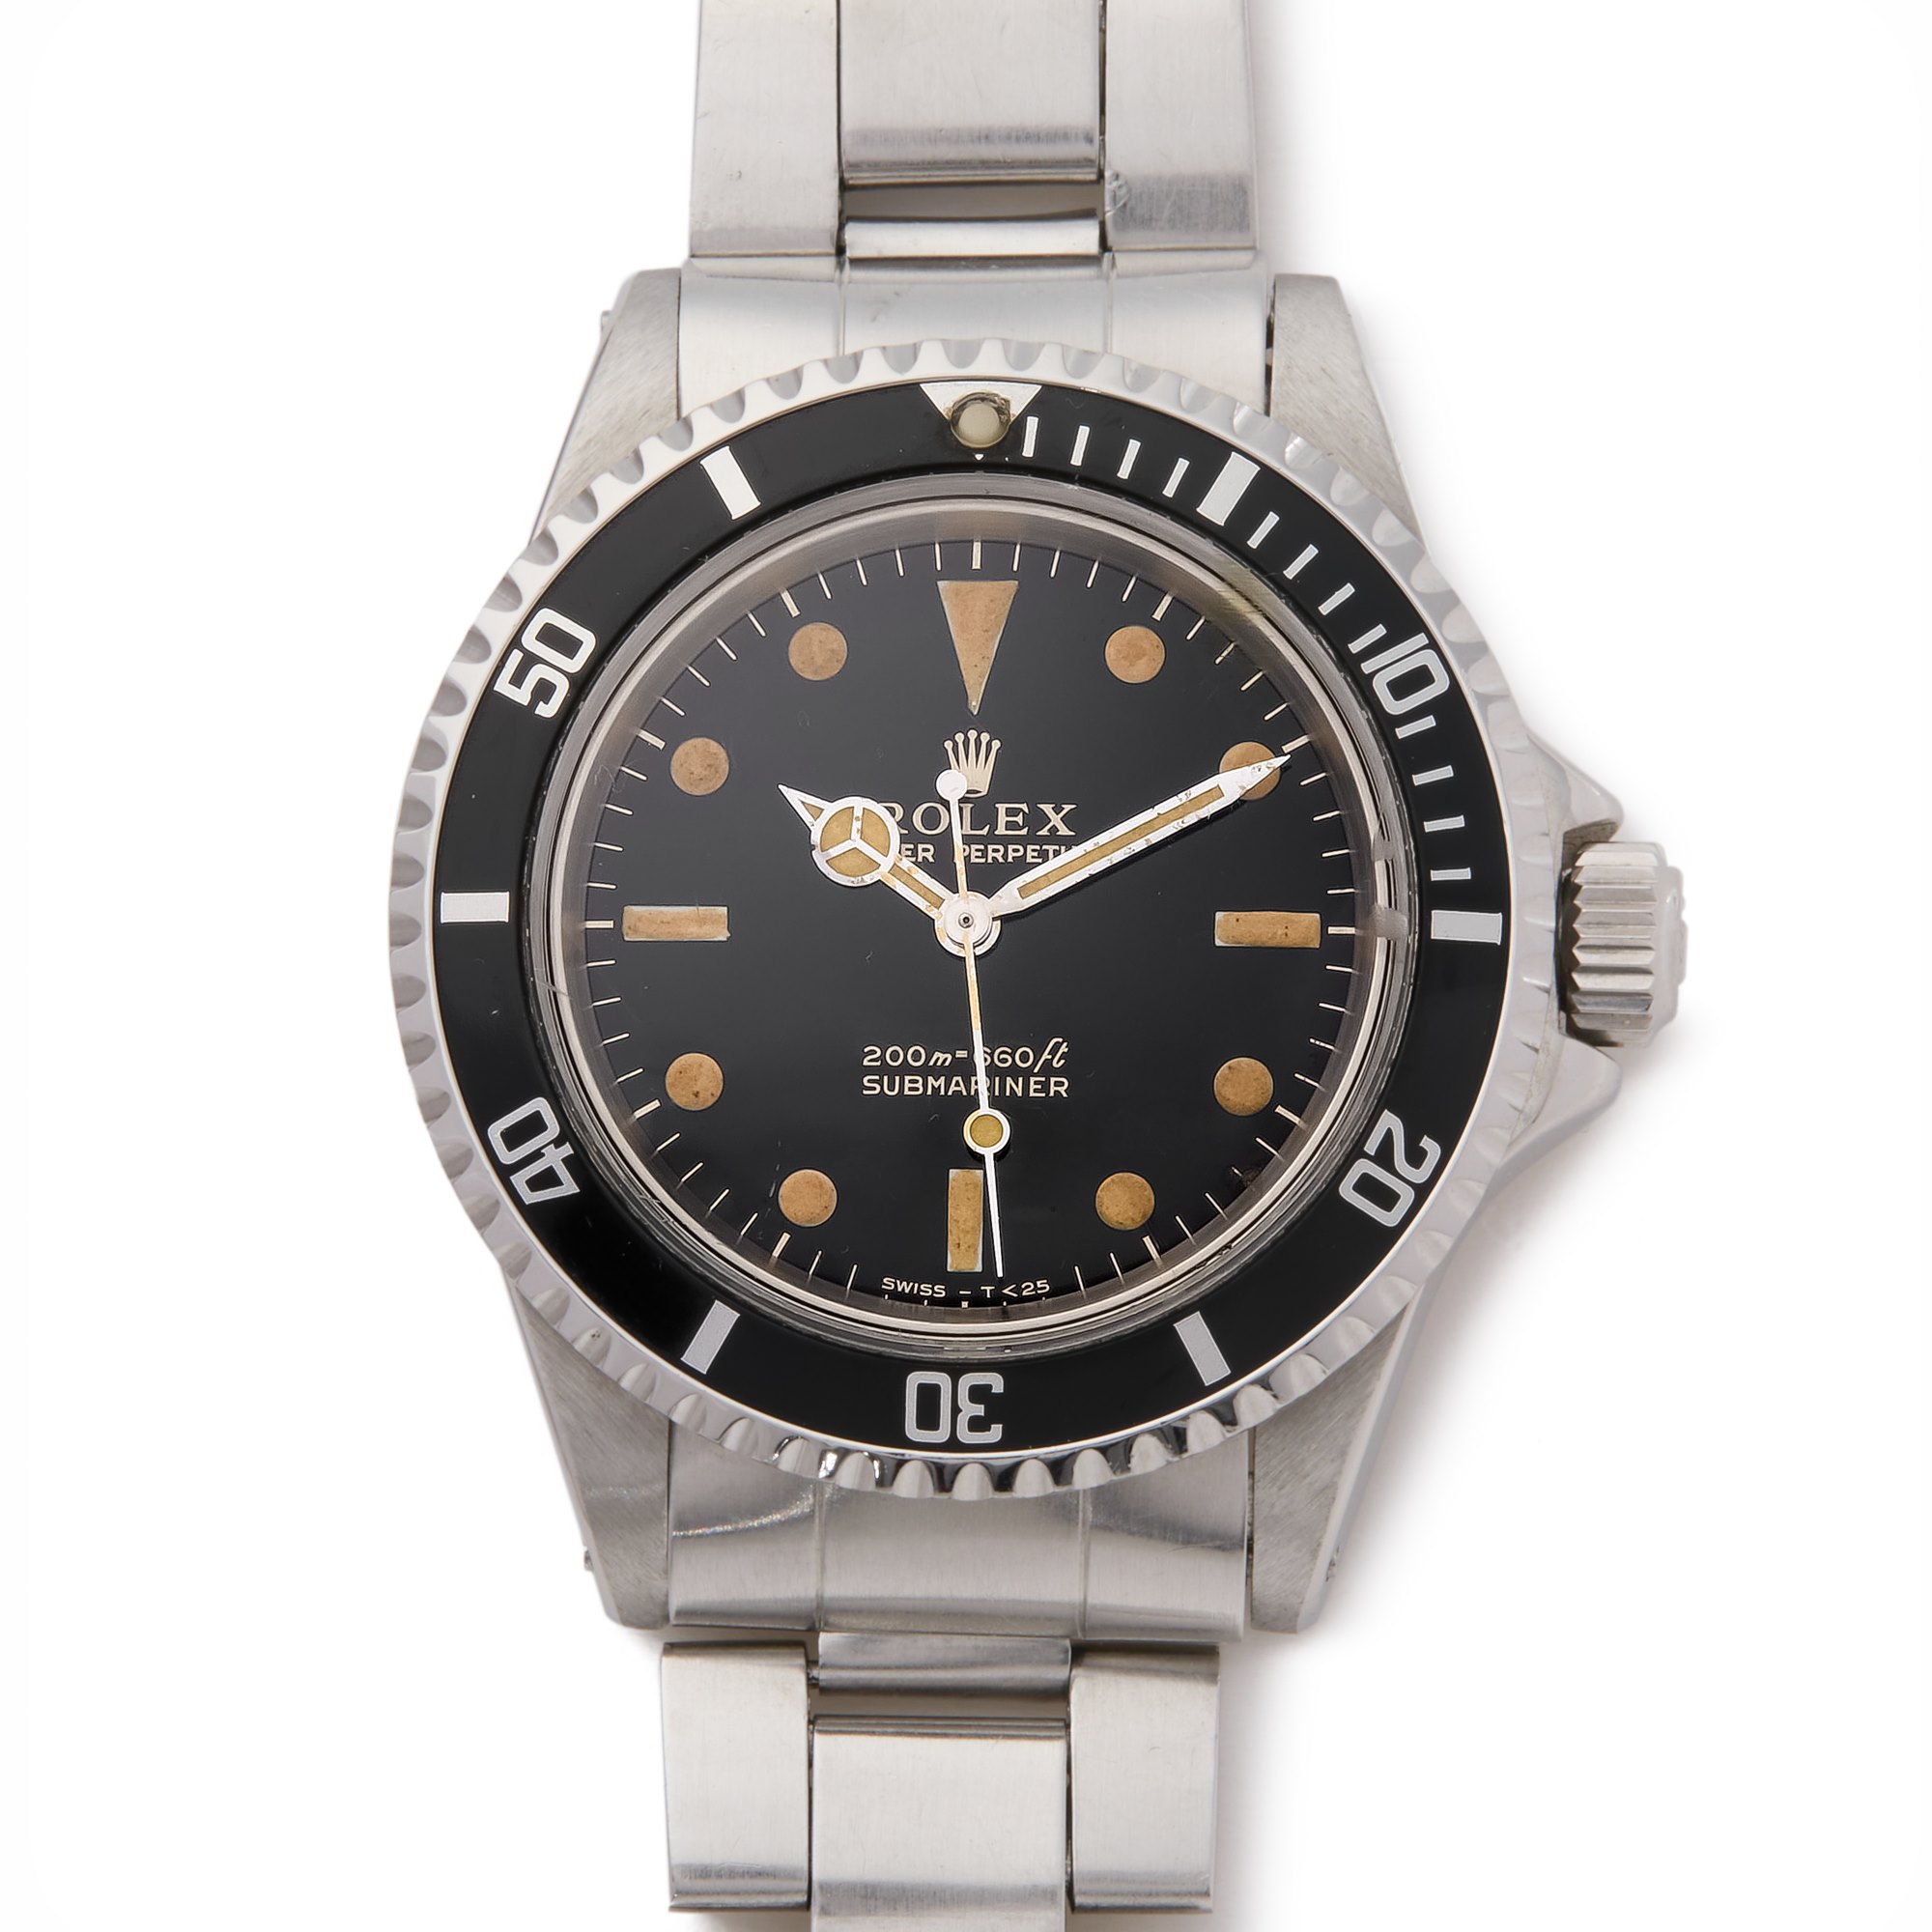 Rolex Submariner Non Date Gilt Gloss Meters First Unpolished Roestvrij Staal 5513